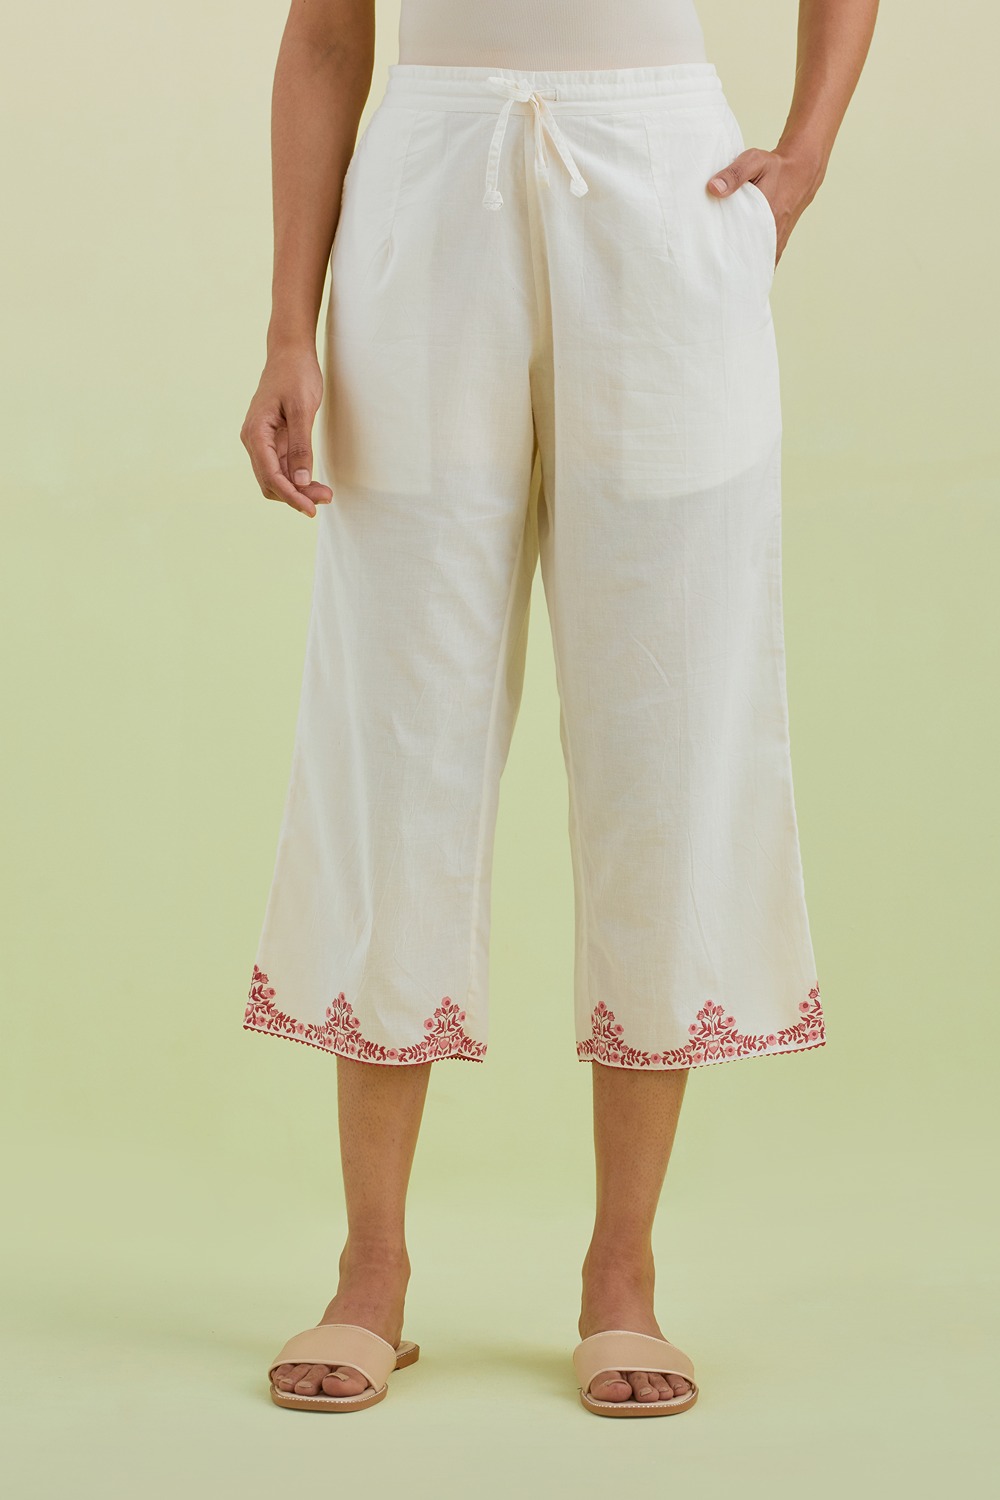 Off White Straight Ankle Length Pants With Pink Colored Hand-Block Printed Border At Hem